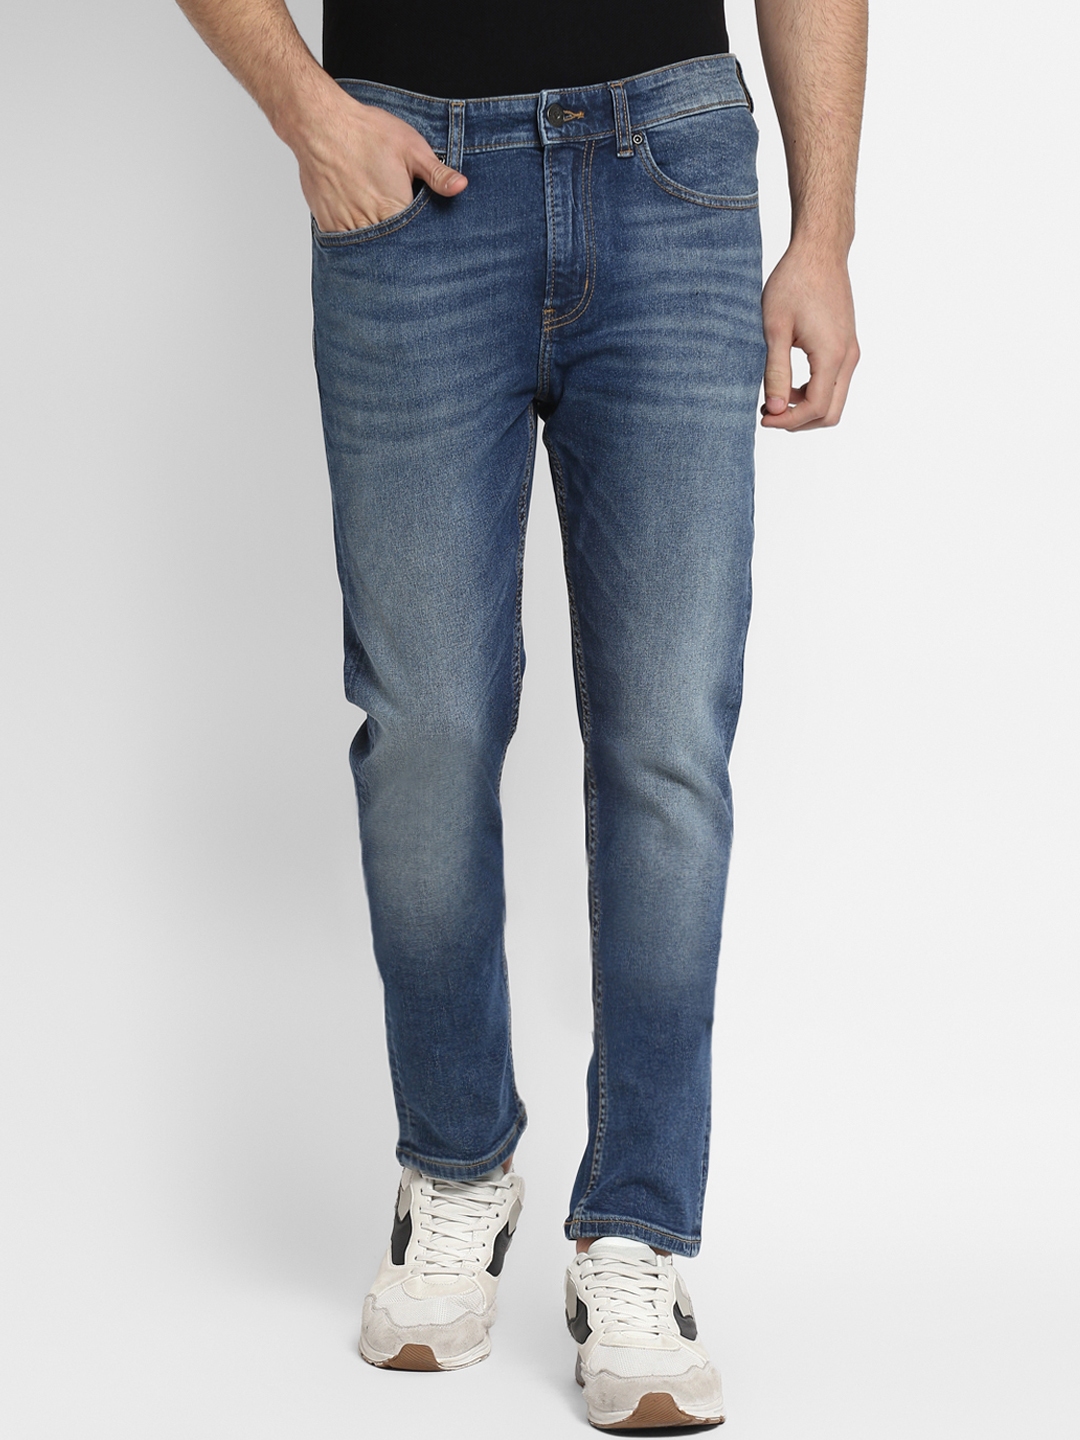 Red Tape Jeans : Buy Red Tape Men Beige Solid Washed Cotton Spandex Skinny  Jeans Online | Nykaa Fashion